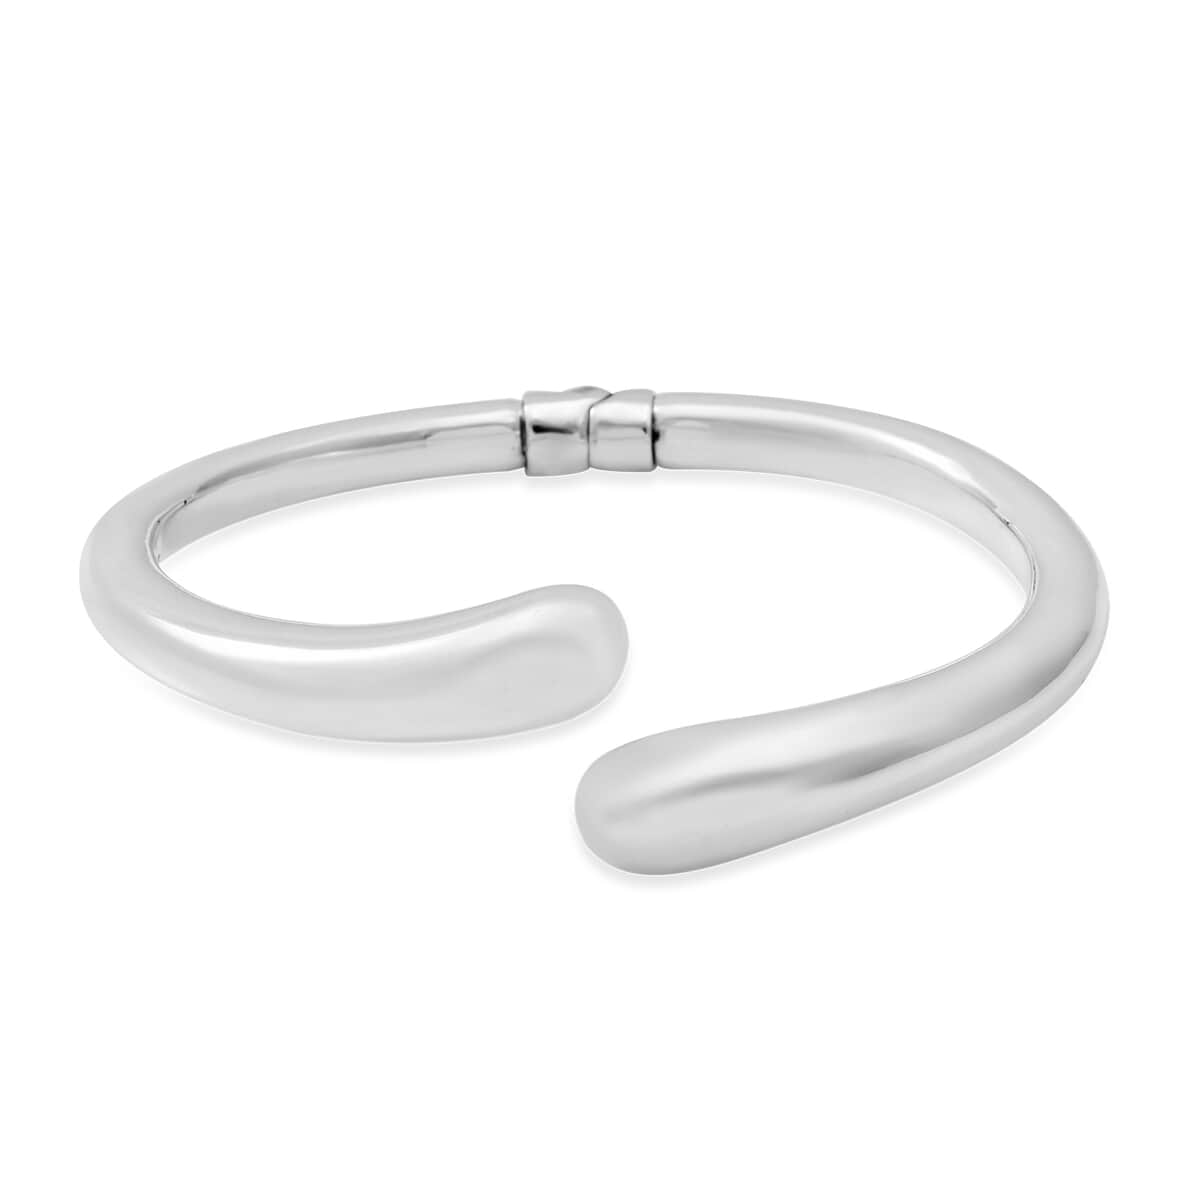 Designer Inspired Oversized Minimalist Sterling Silver Statement Bypass Cuff Bracelet (7 in) 11.55 Grams image number 0